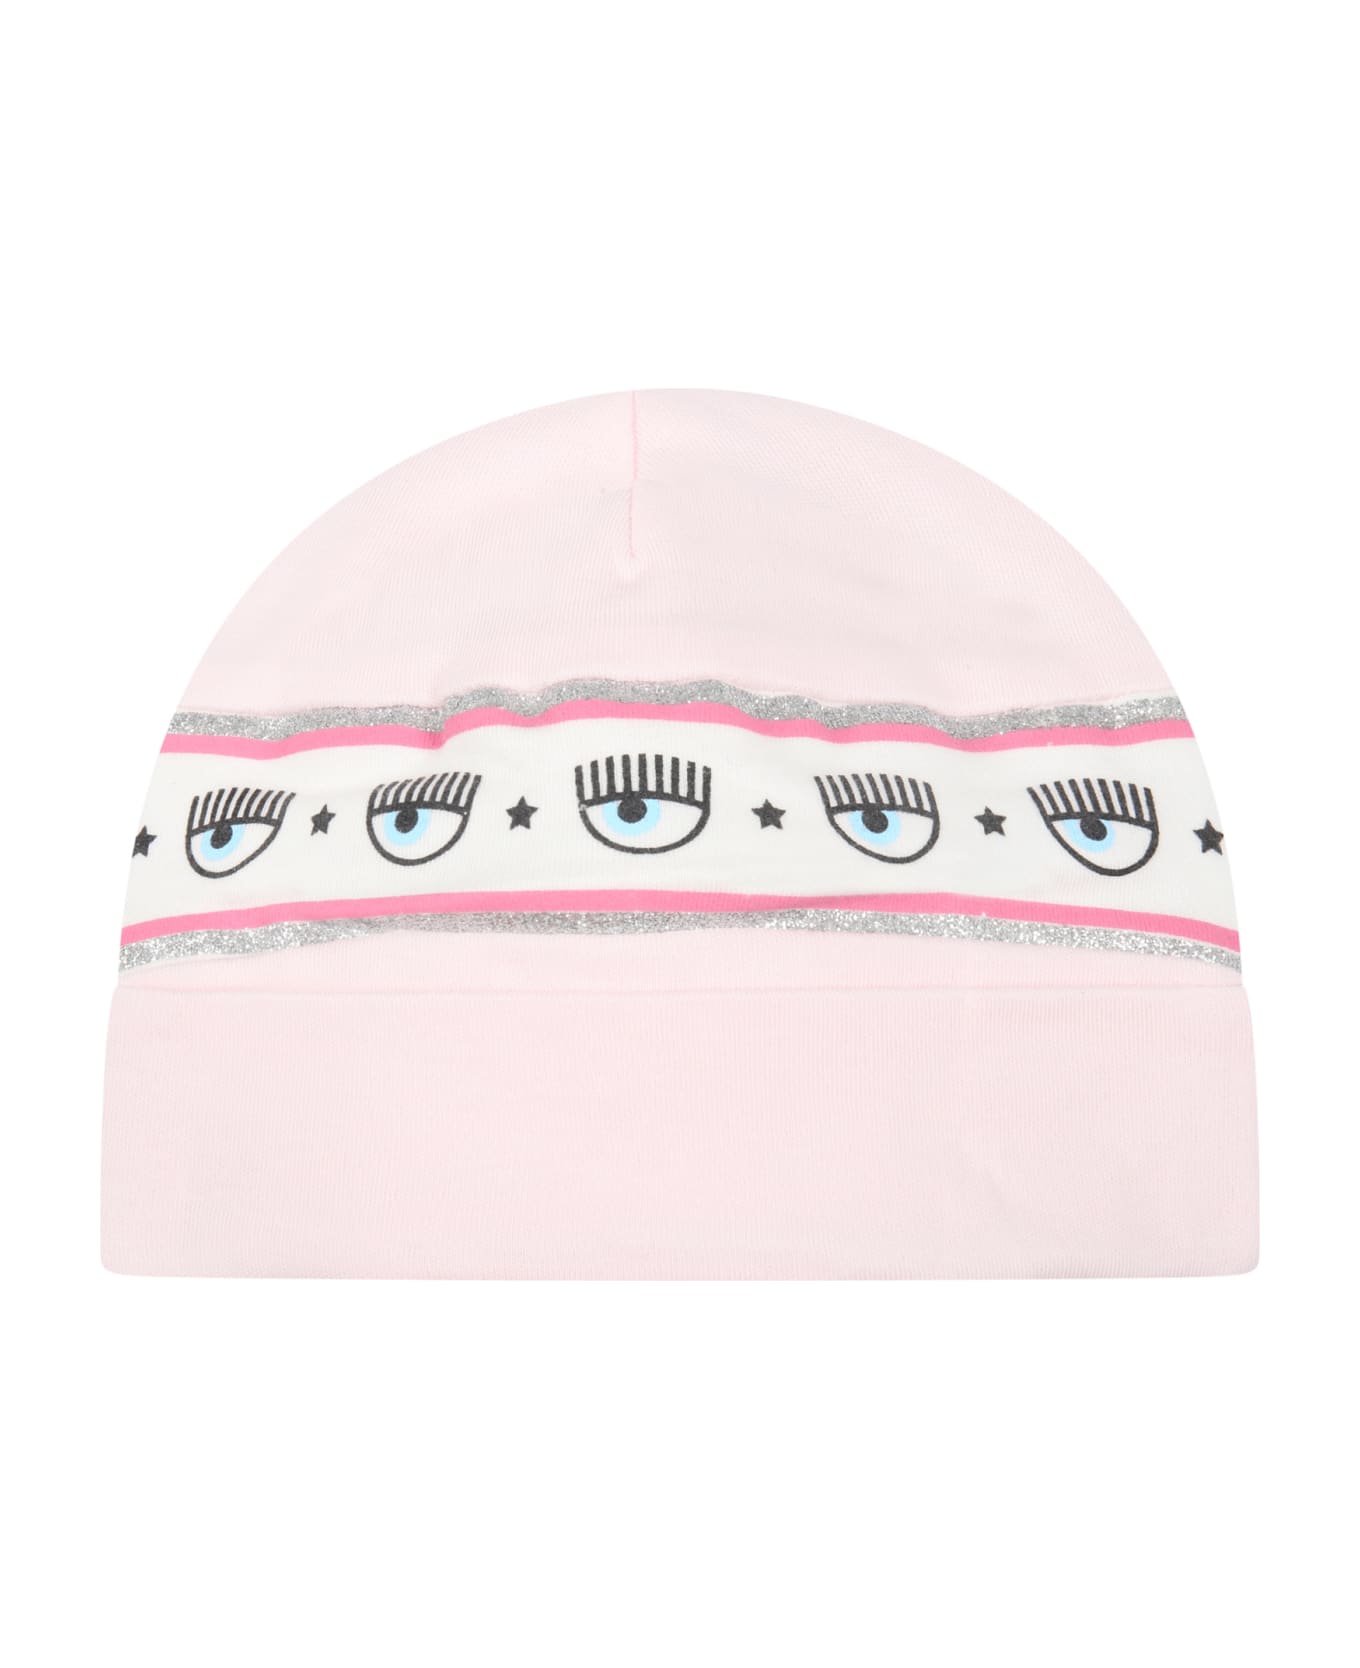 Chiara Ferragni Pink Hat For Baby Girl With Iconic Blinking Eyes - Pink